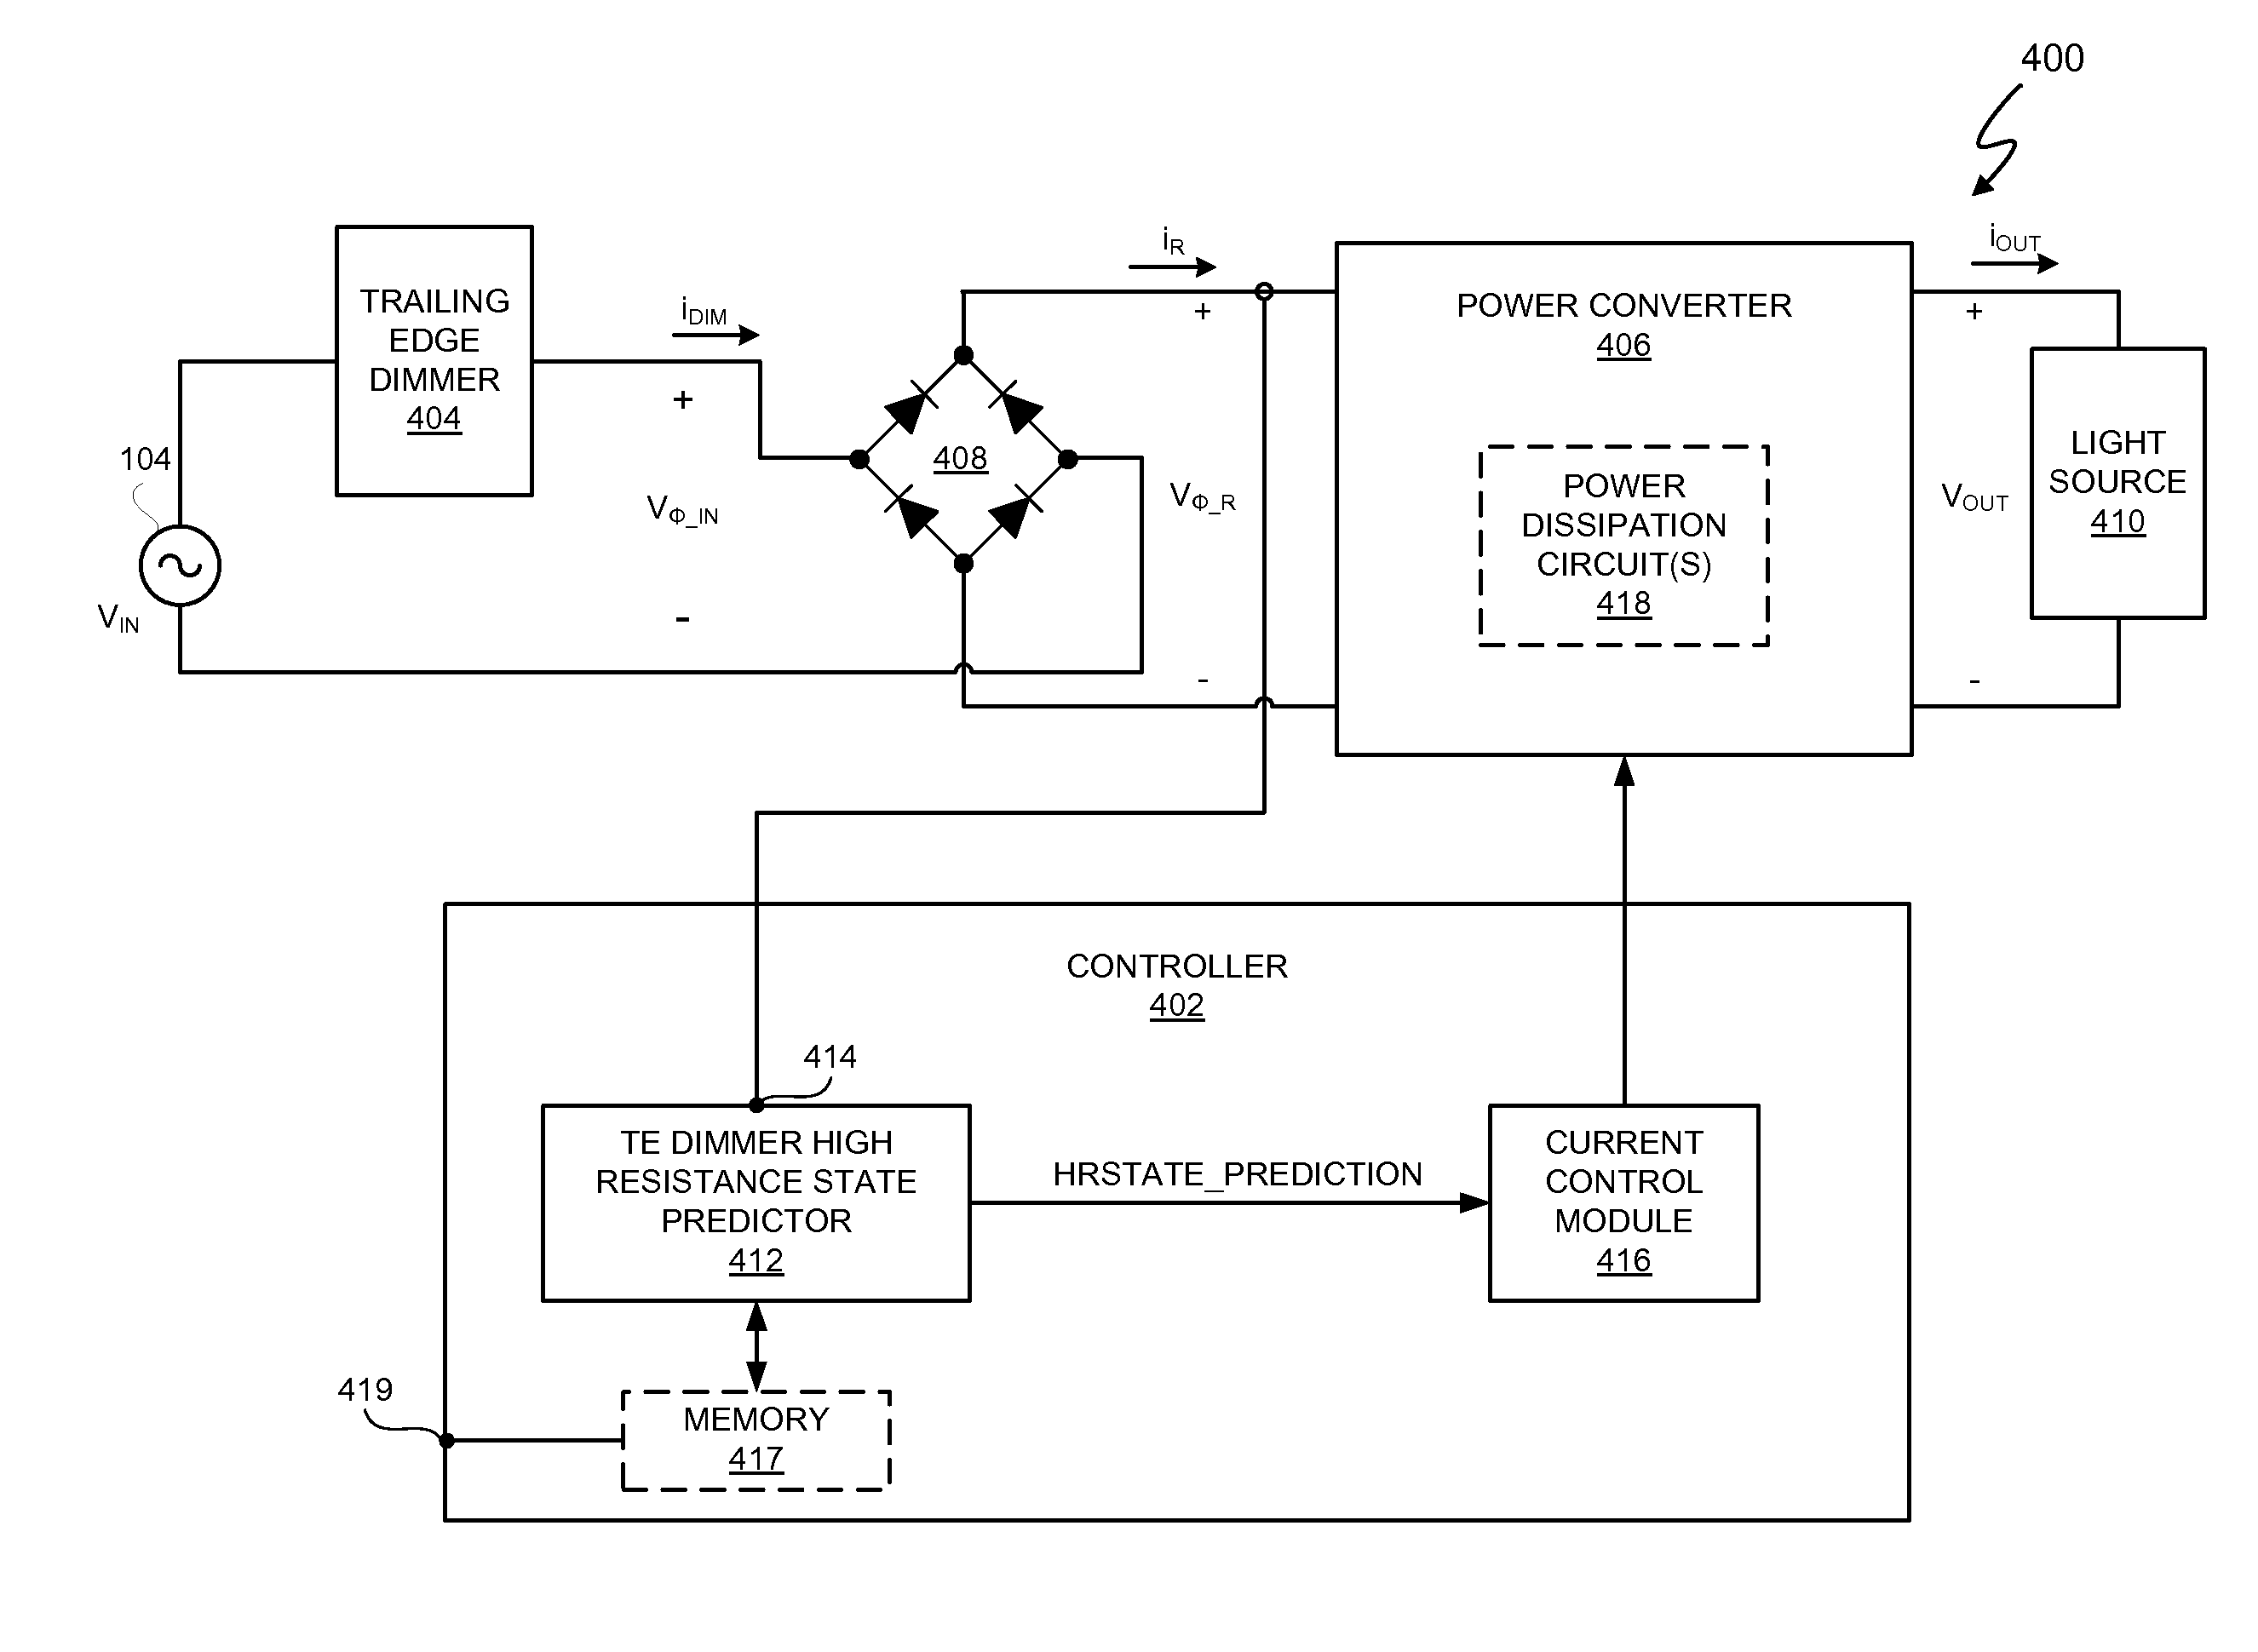 Trailing edge dimmer compatibility with dimmer high resistance prediction